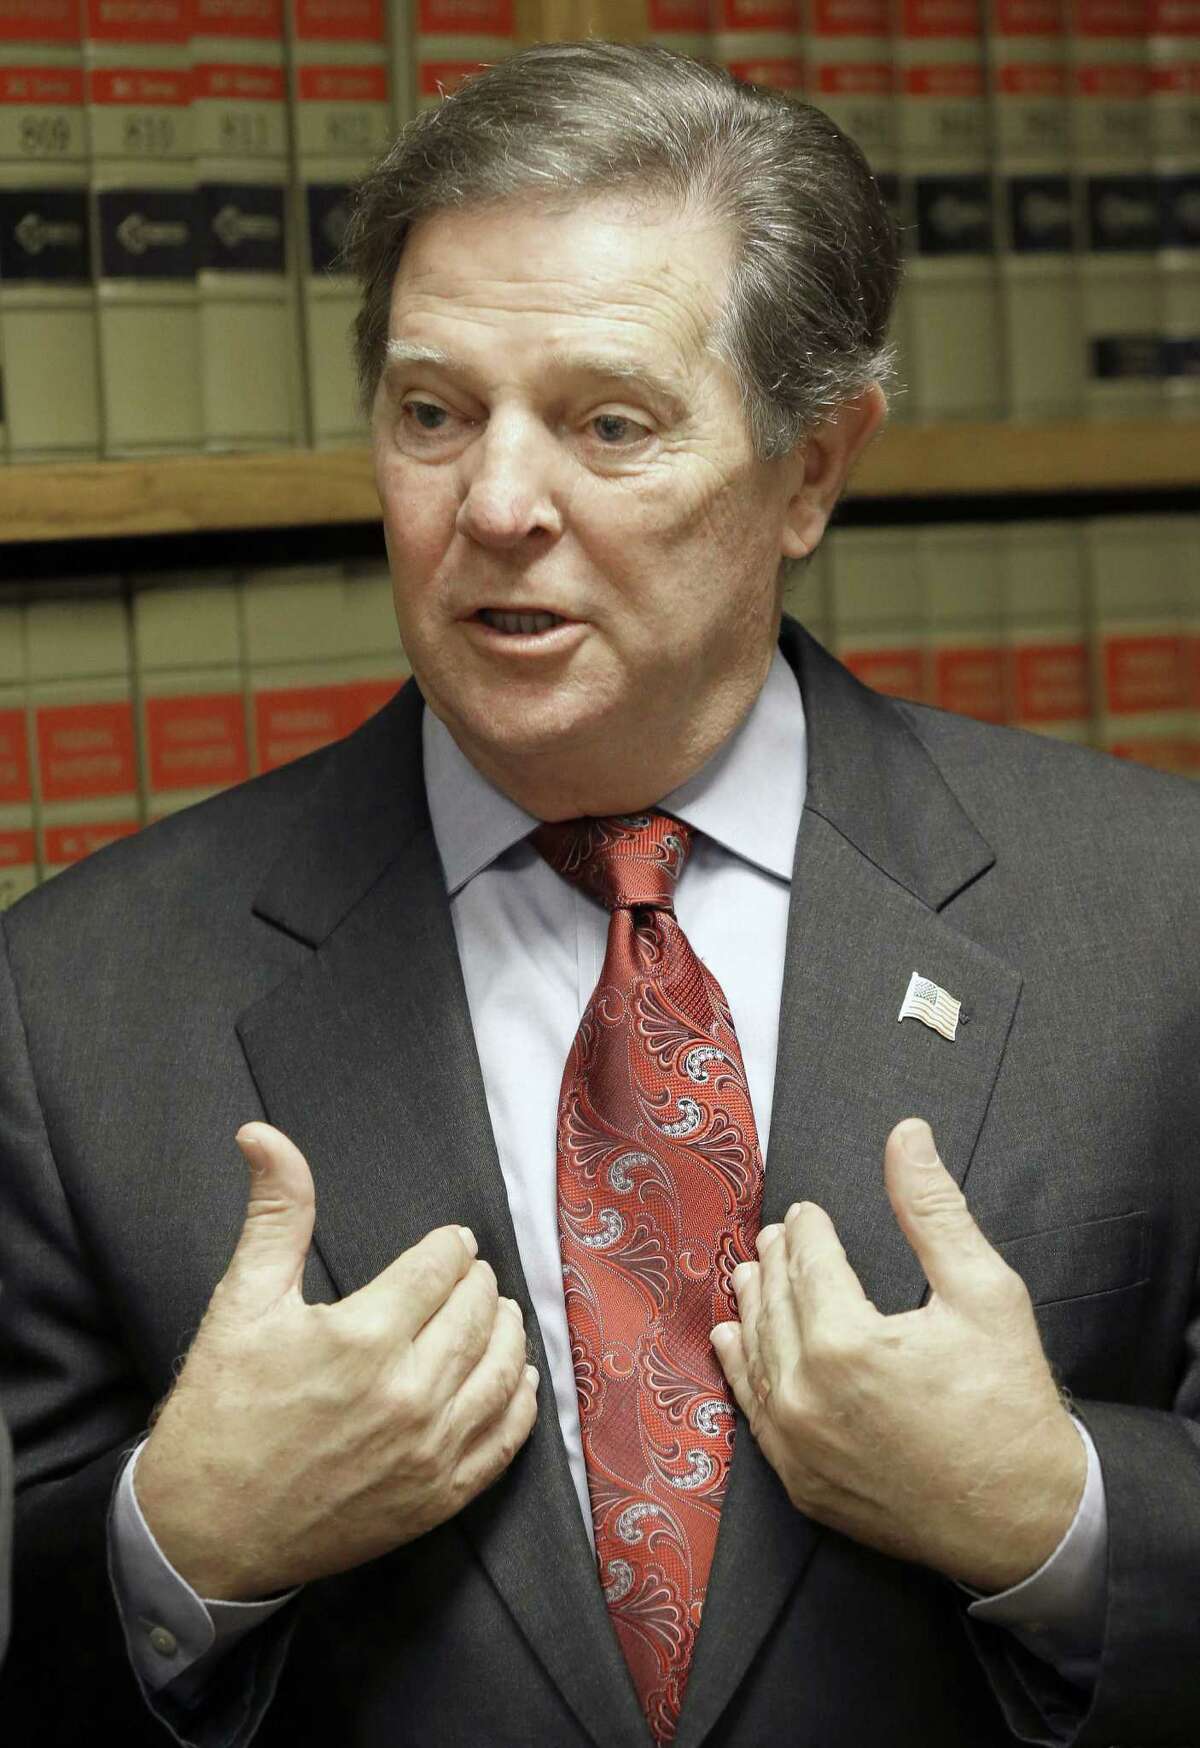 Former U.S. House Majority Leader Tom DeLay speaks with the news media in Houston after the highest criminal court in Texas refused to reinstate two money-laundering convictions against him.